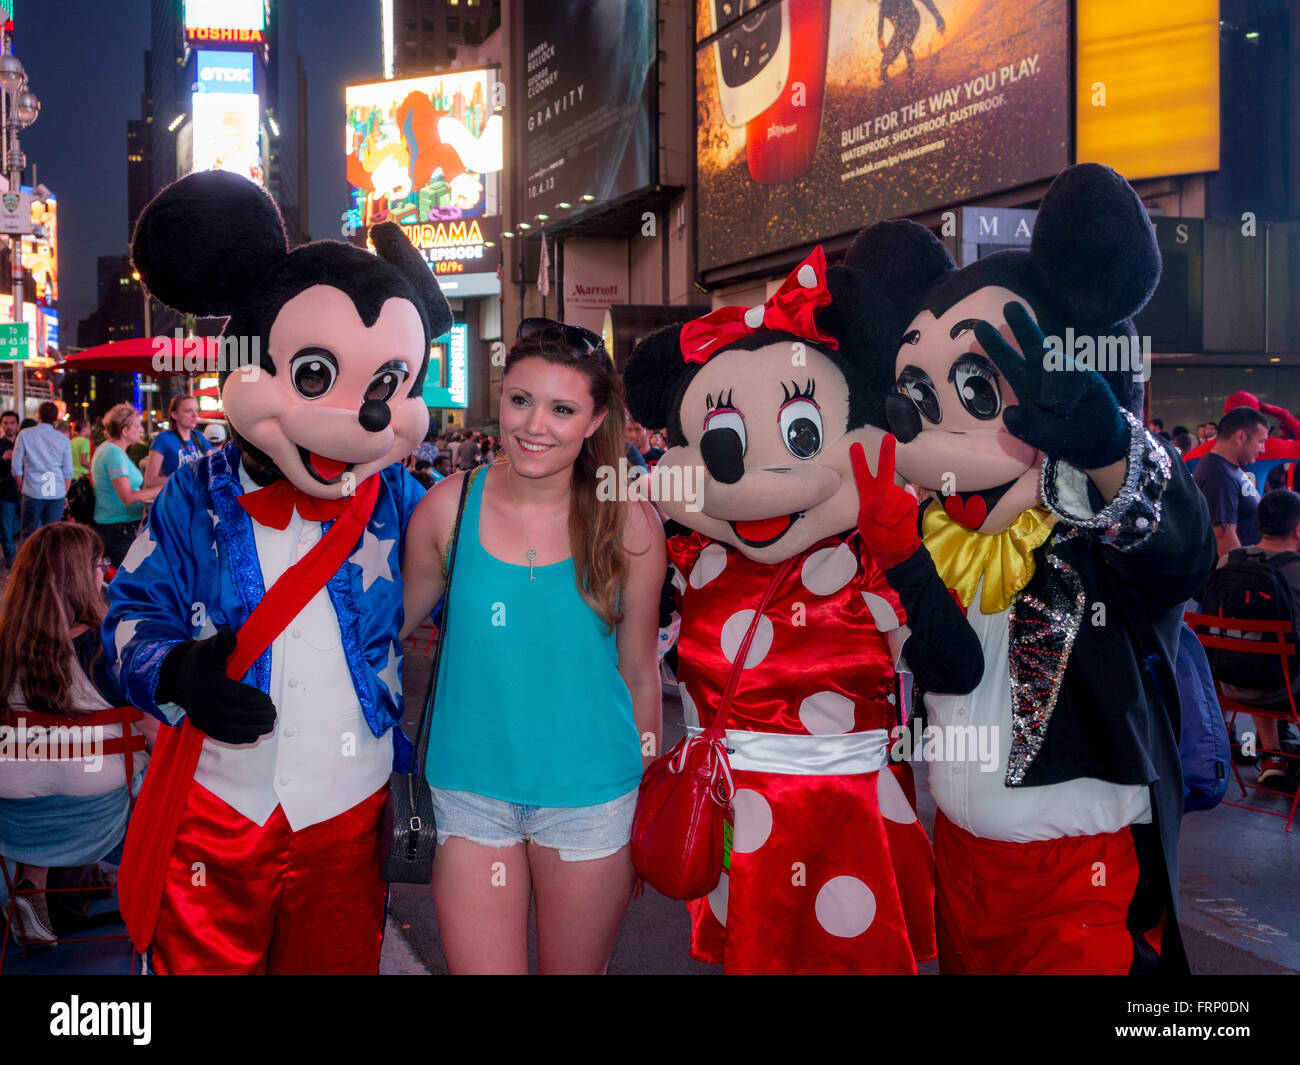 Female tourist with Mickey and Minnie Mouse characters, Times ...